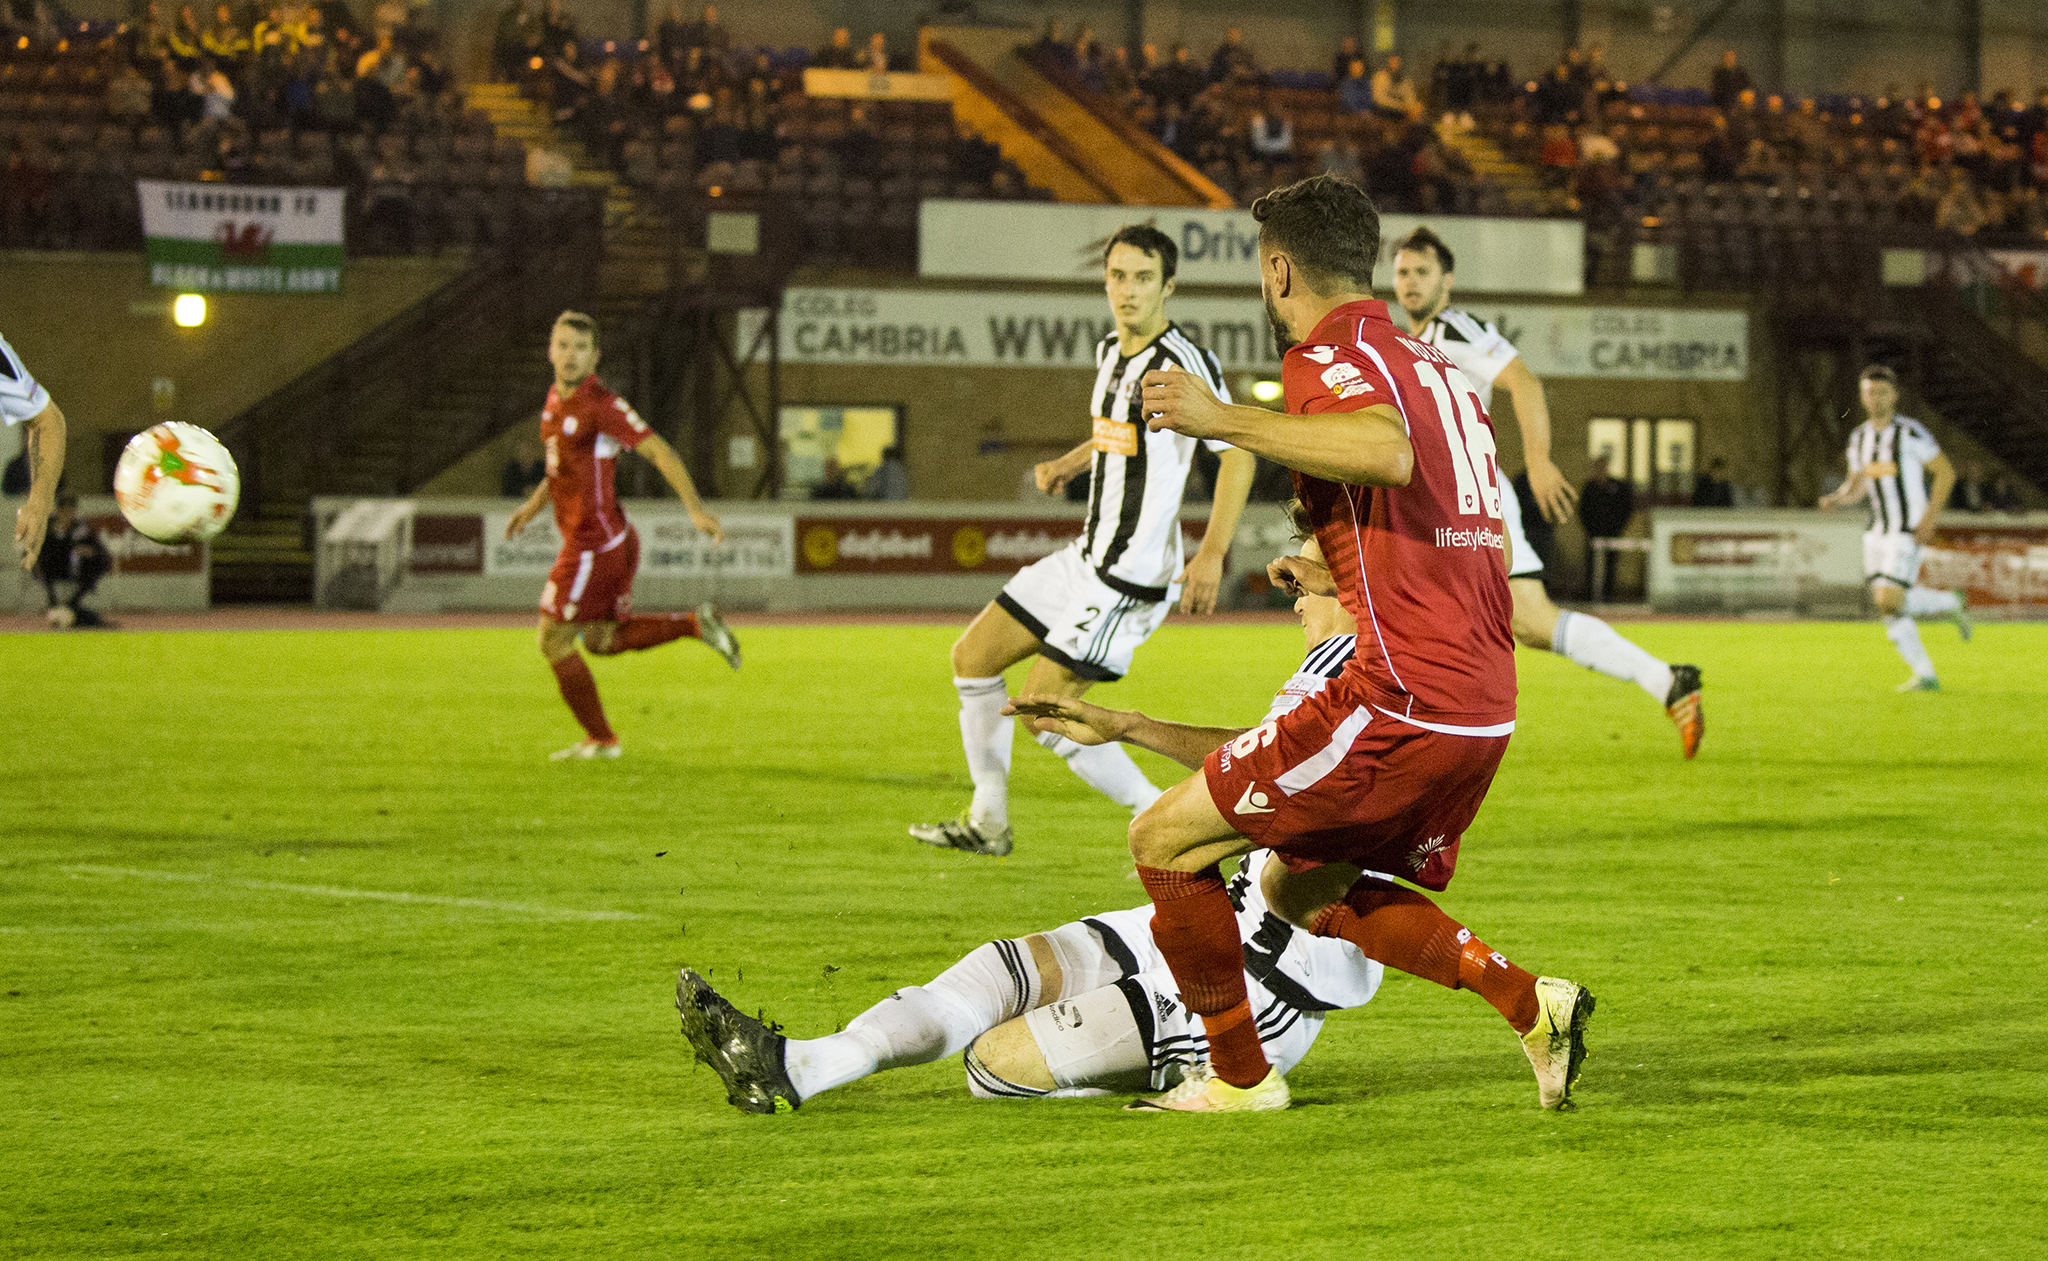 Nathan Woolfe flashes a cross across the face of the Llandudno goal - © NCM Media